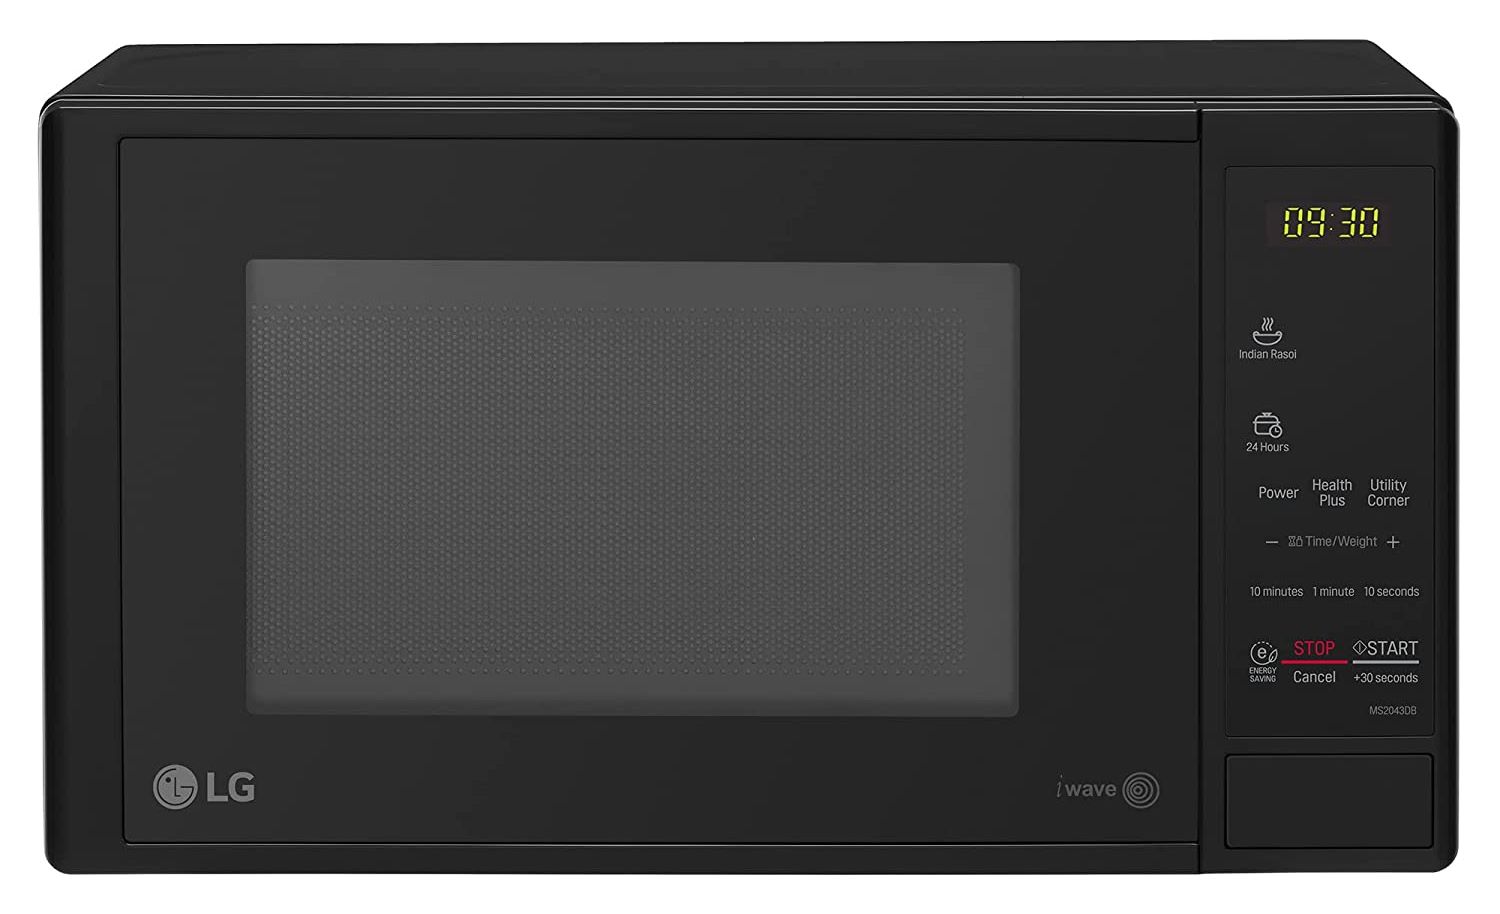 LG 20 L Solo Microwave Oven (MS2043DB)